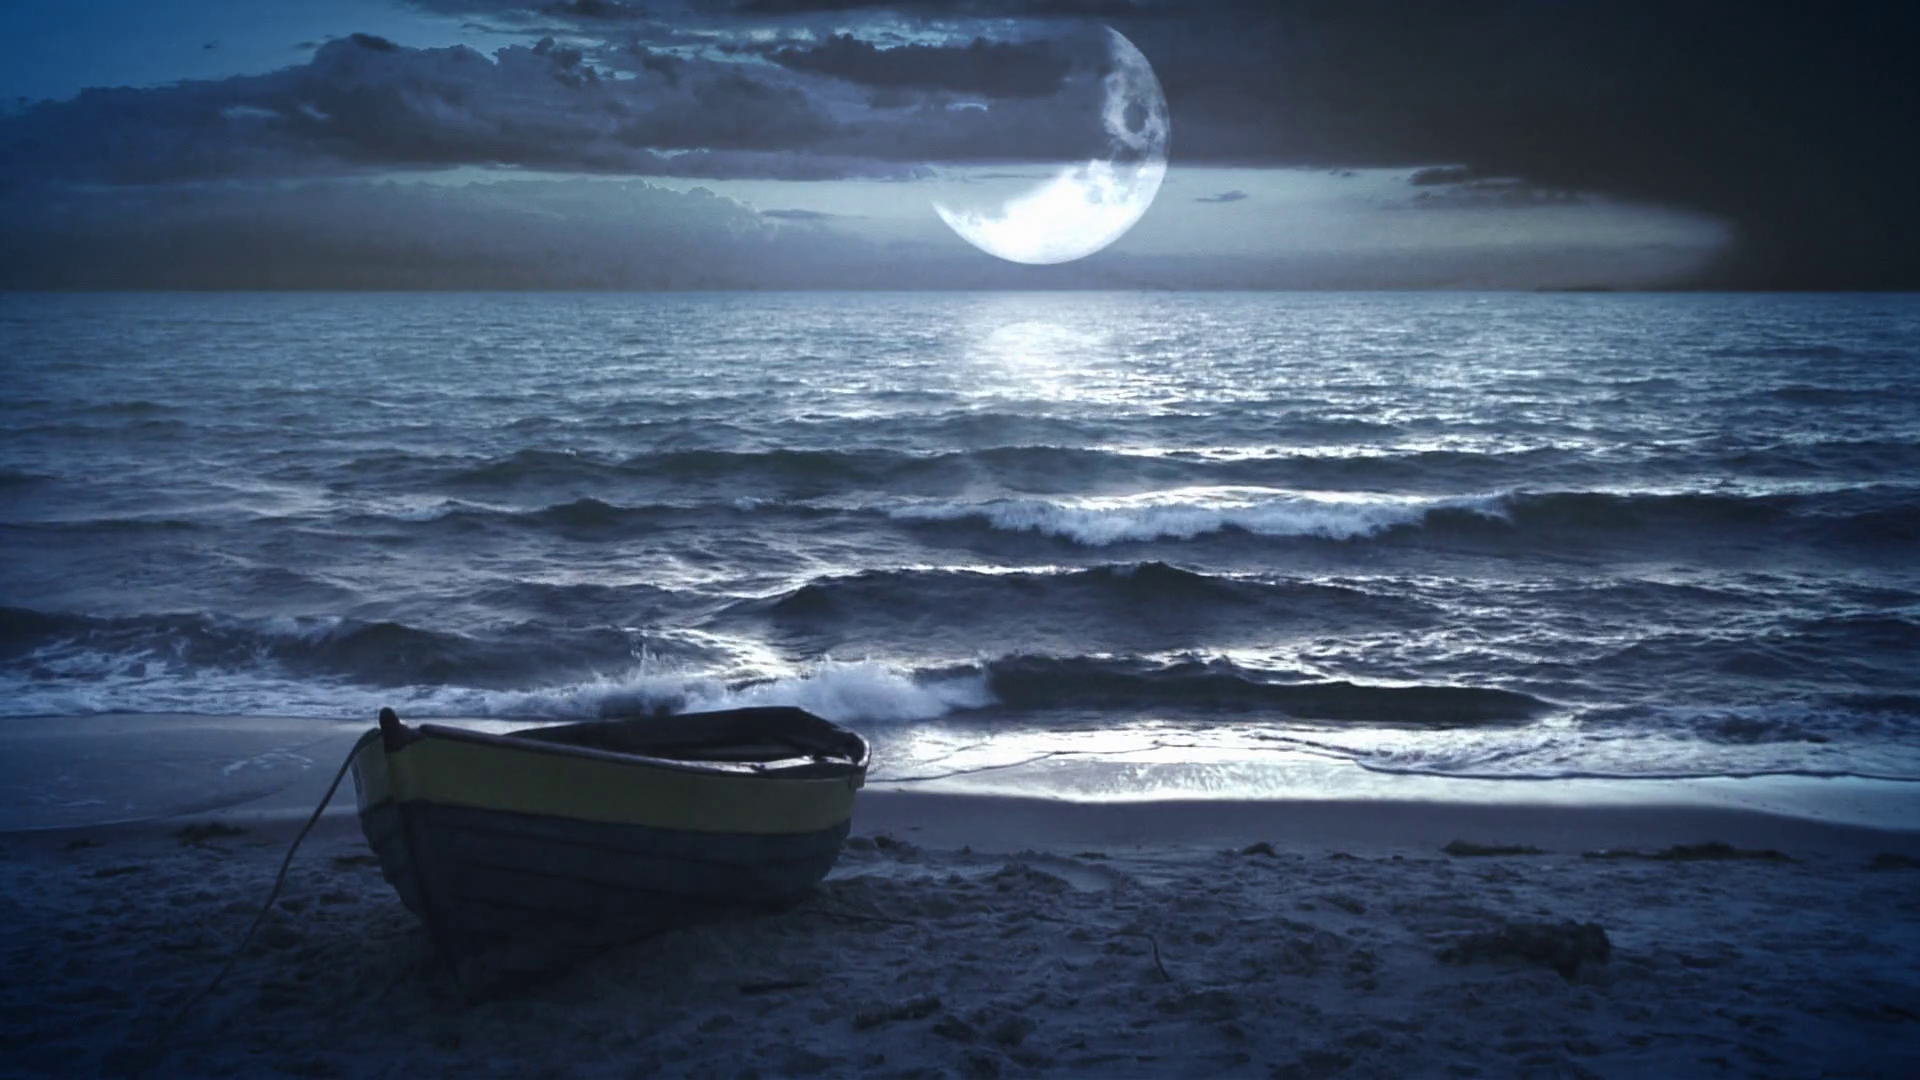 Lonely boat at night with a beautiful big waxing moon above the sea ...